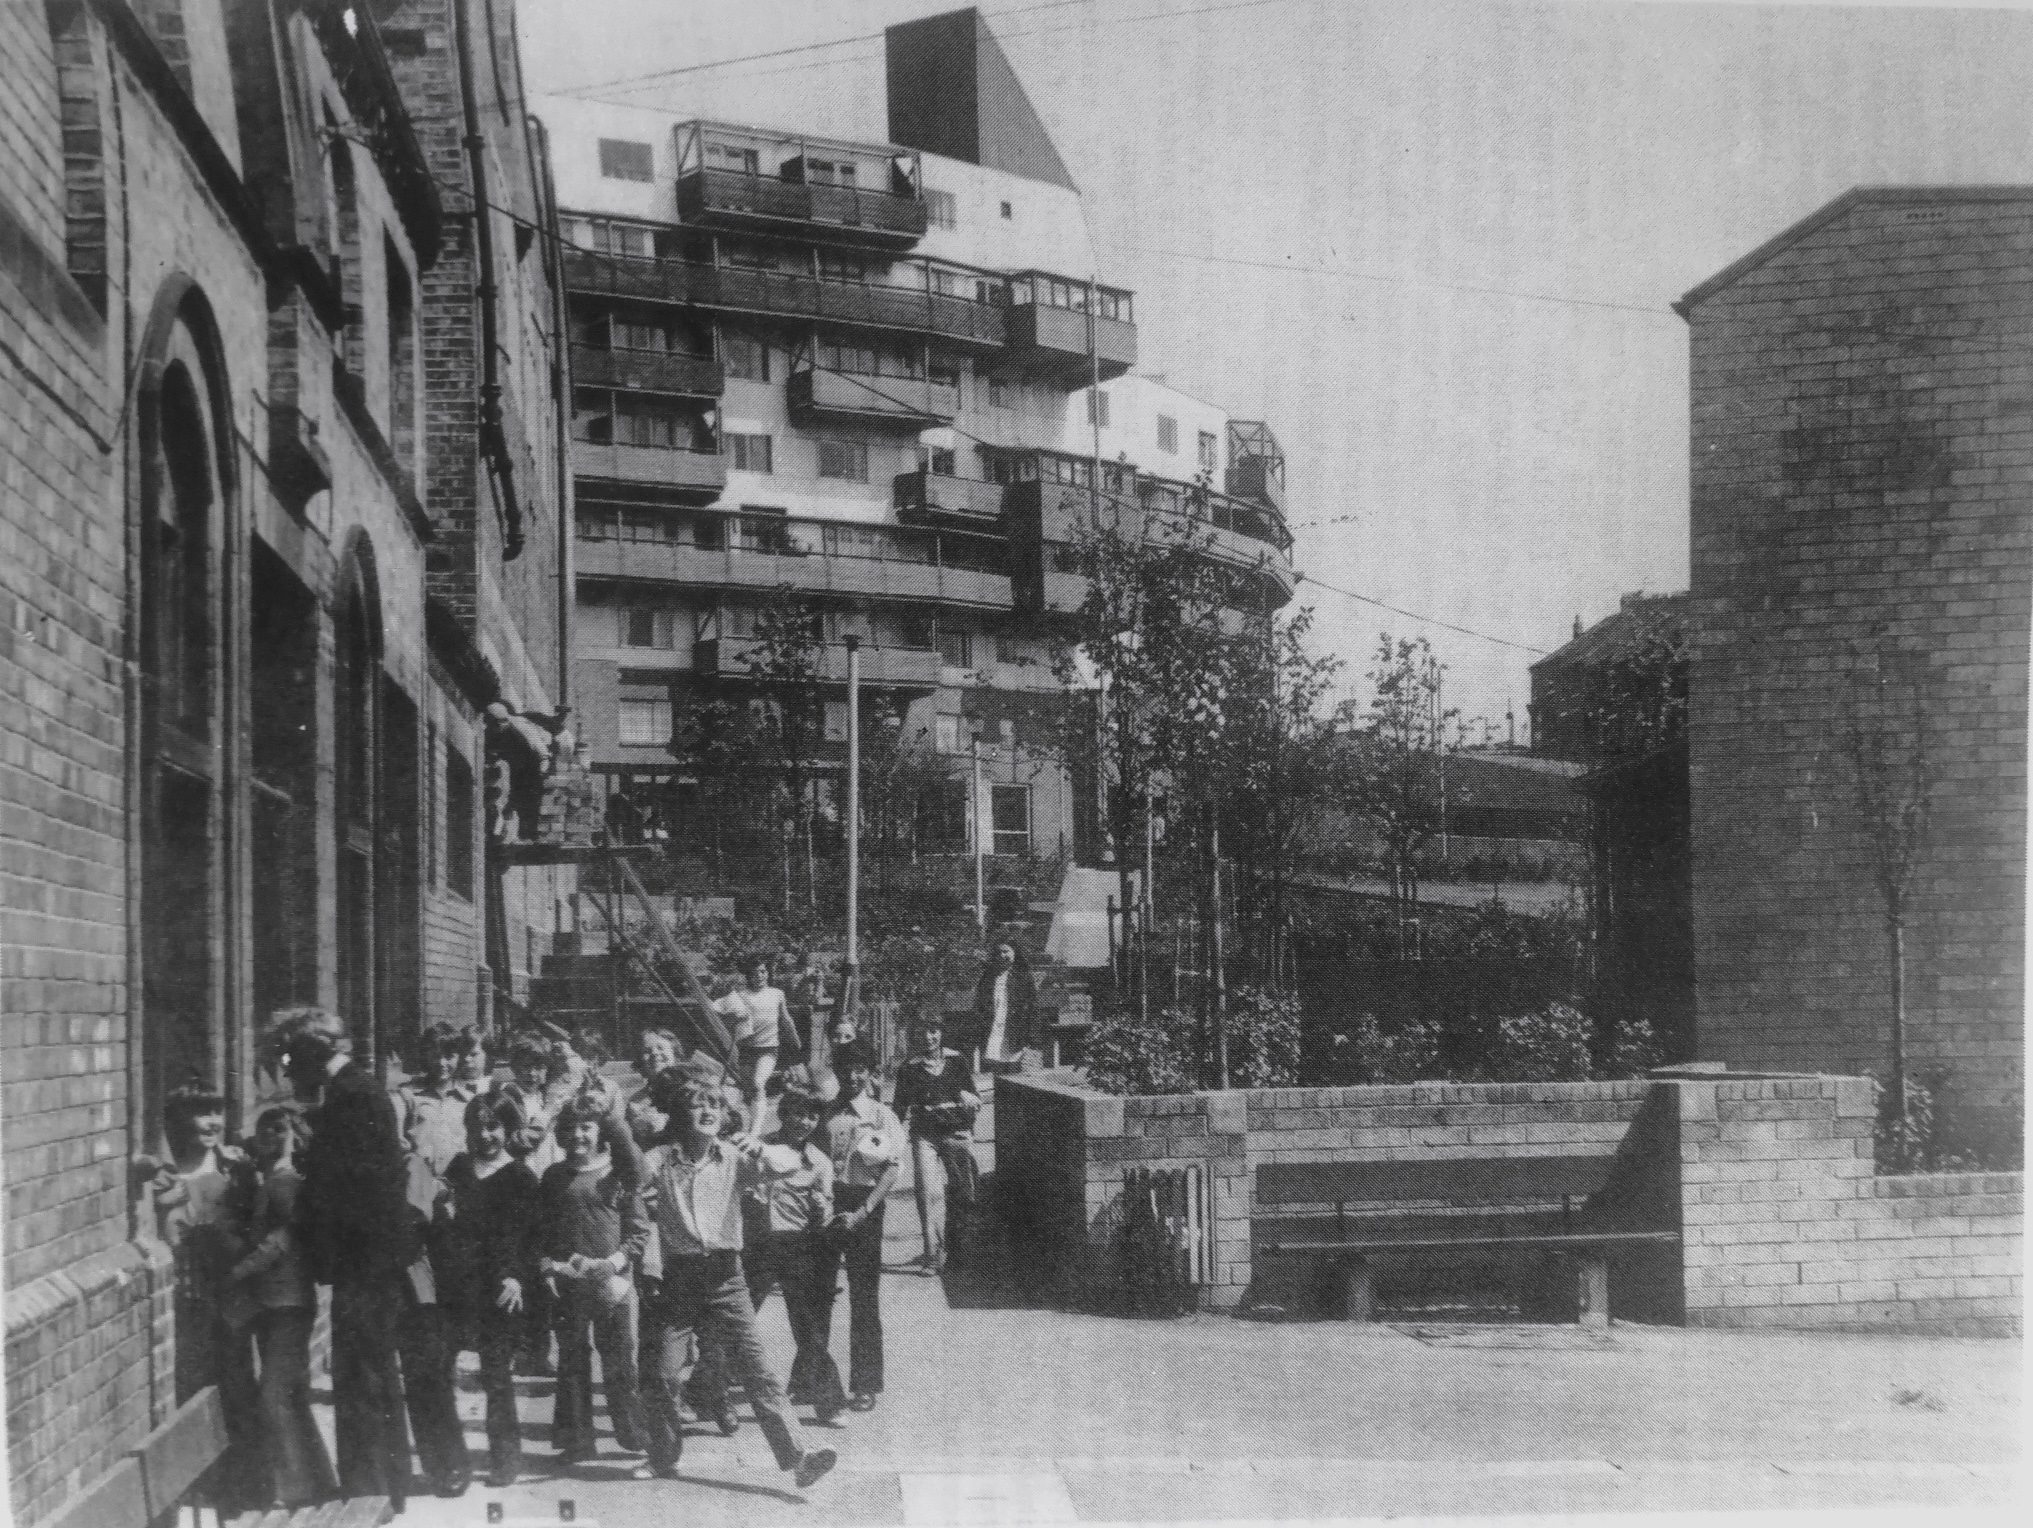 A group of children and an adult stand in front of the Byker Wall